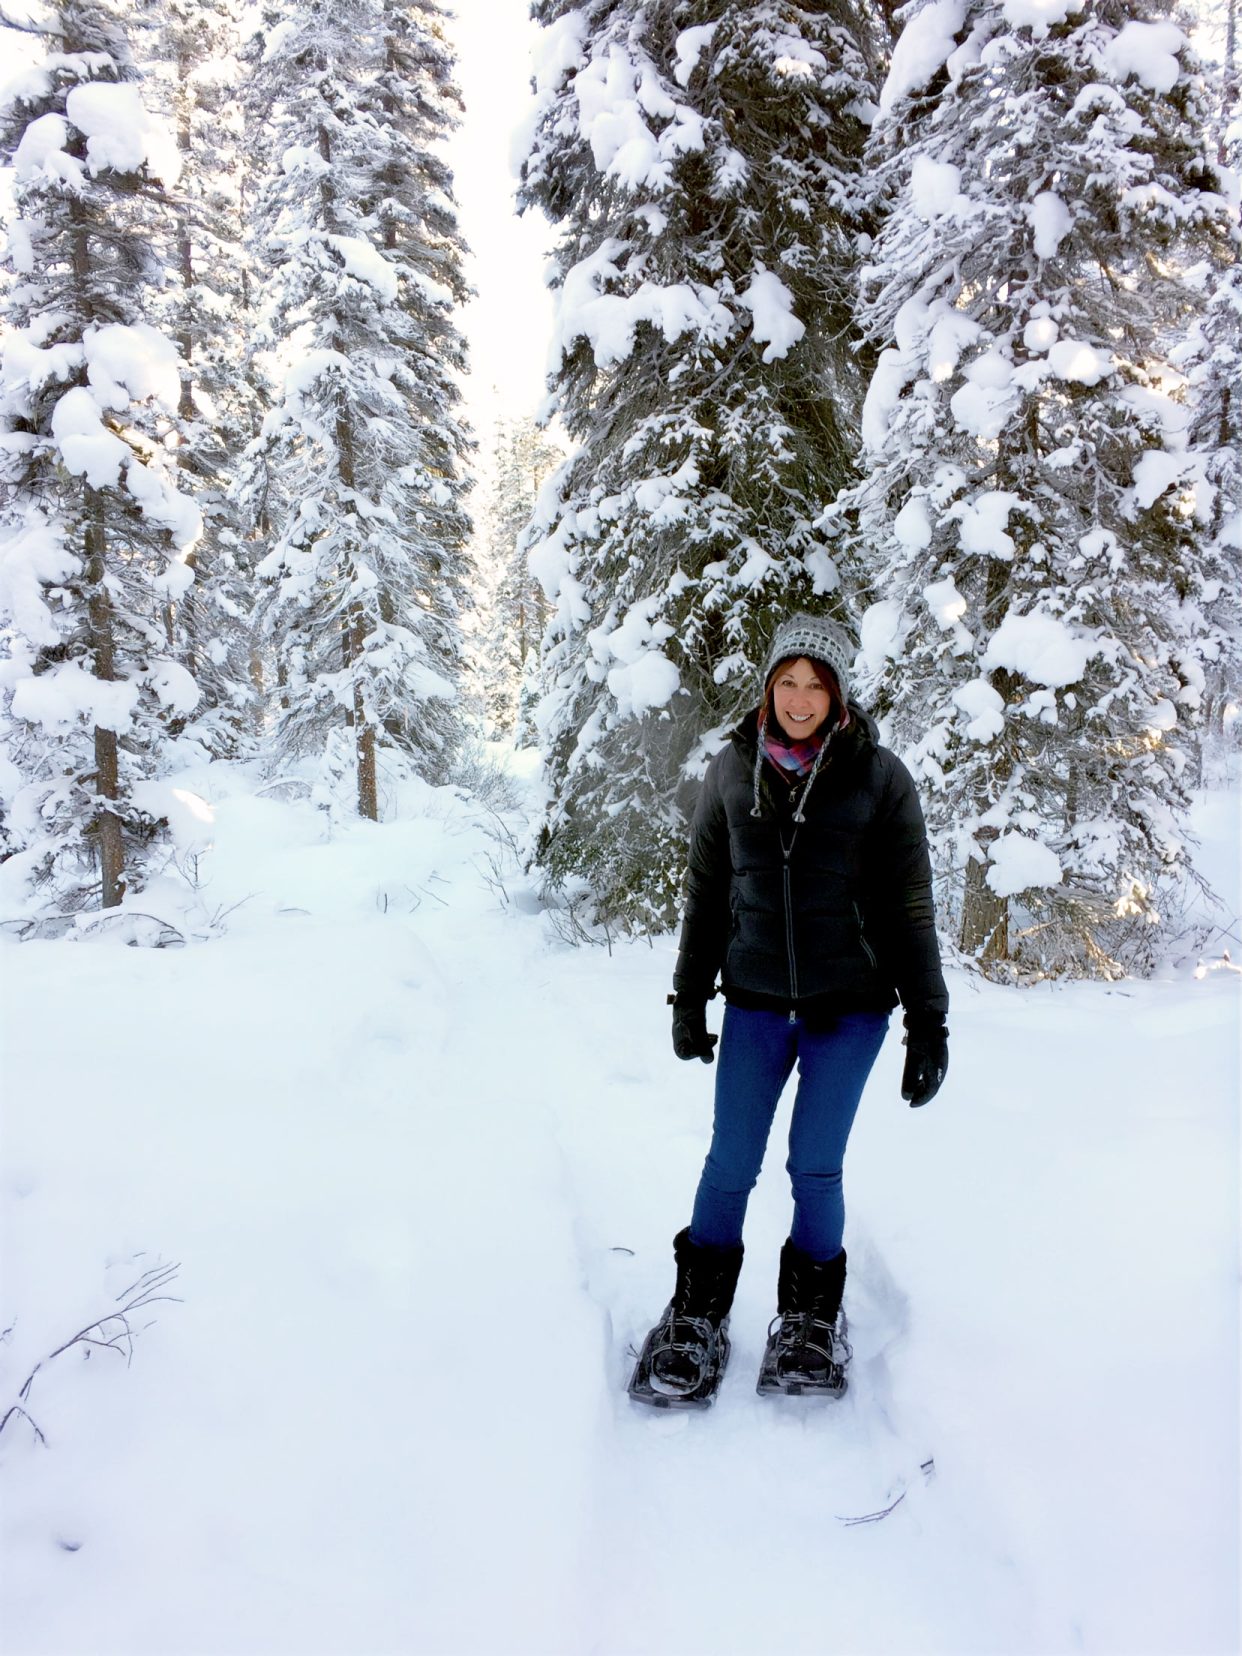 Shelley in snowshoes in the snow surrounded by snowy pine trees